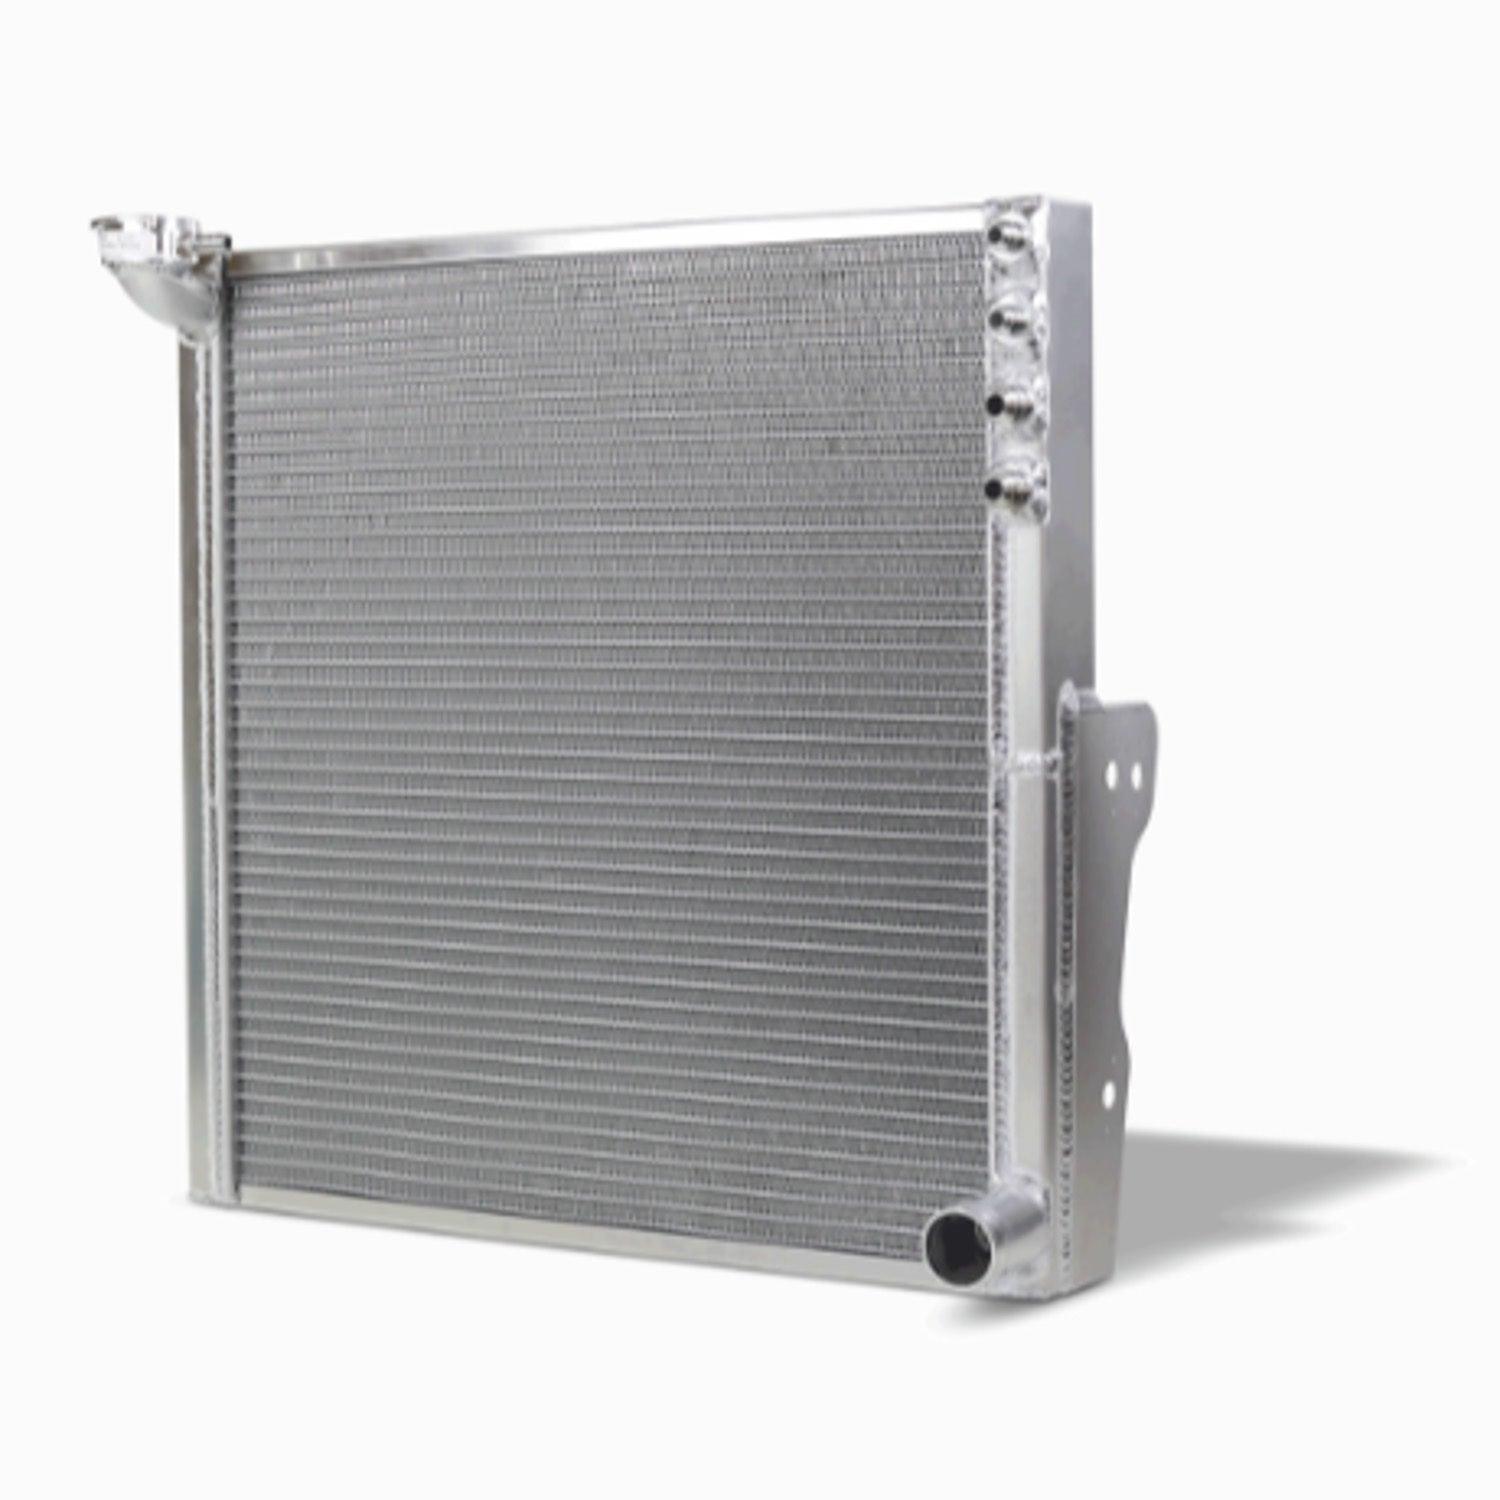 Radiator 20.5in W x 20in Tall LW Spring Dbl Pass - Burlile Performance Products